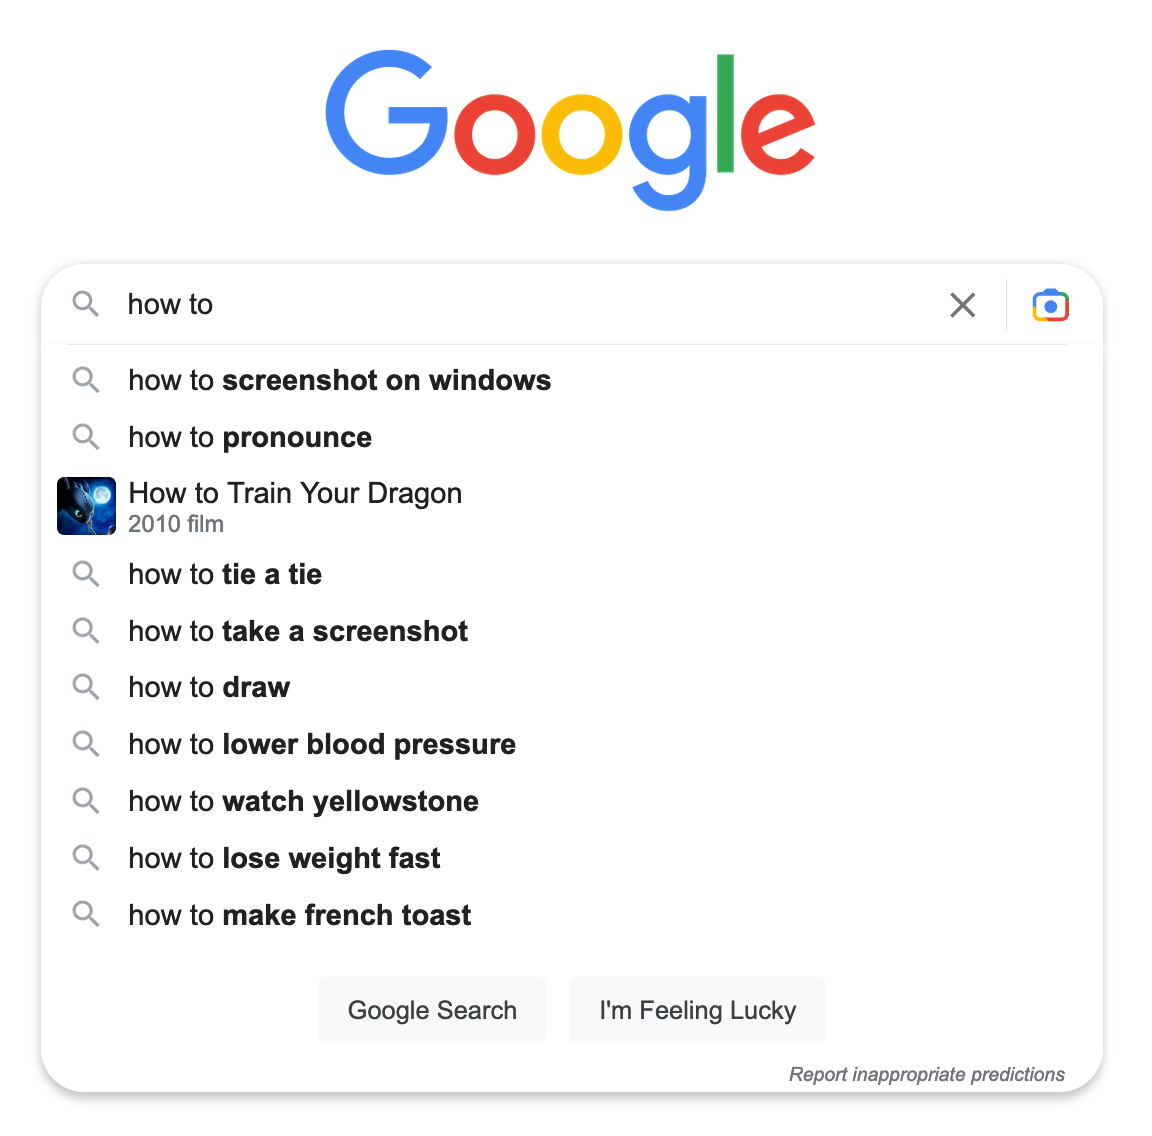 Google search preview with how to typed in and then Google autopopulating some possible questions searchers ask. Such as how to tie a tie or how to draw or how to make french toast and so on.